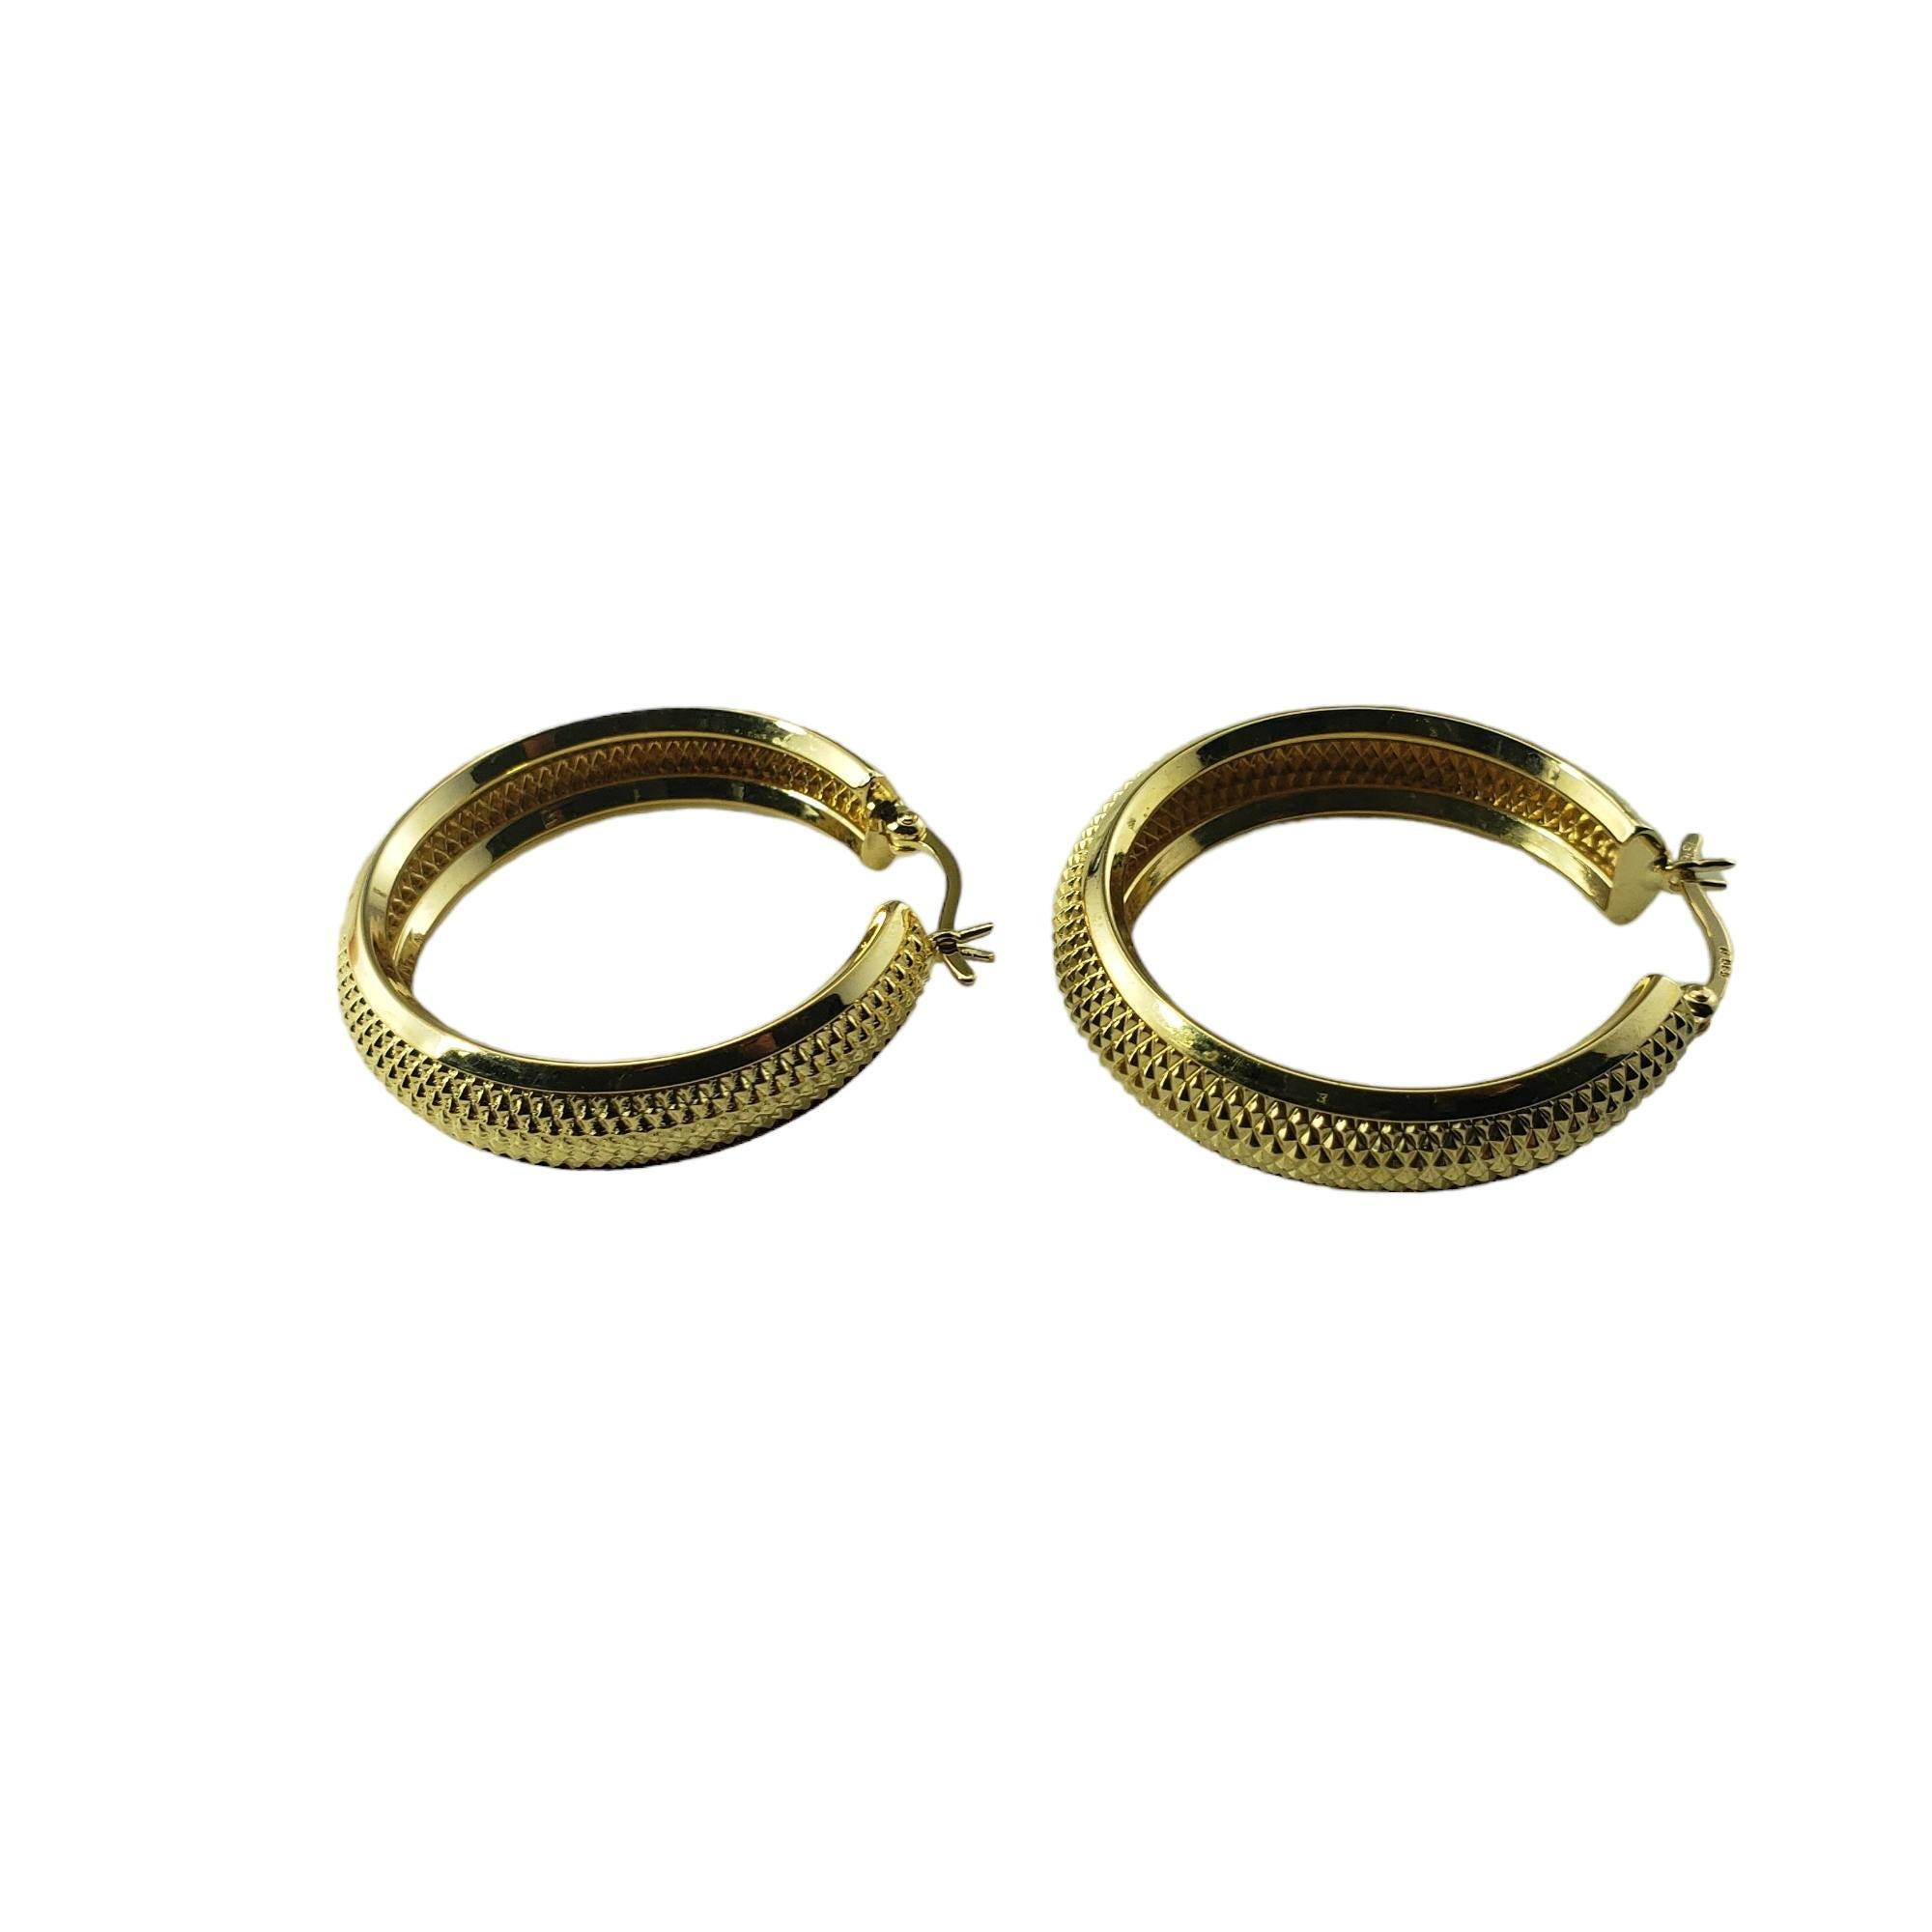 Vintage 14 Karat Yellow Gold Textured Hoop Earrings-

These elegant hoop earrings are crafted in beautifully detailed 14K yellow gold.  Width:  7.2 mm

Size: 31.5 mm

Weight:  5.5 gr./ 3.5 dwt.

Stamped: Israel  A585

Very good condition,